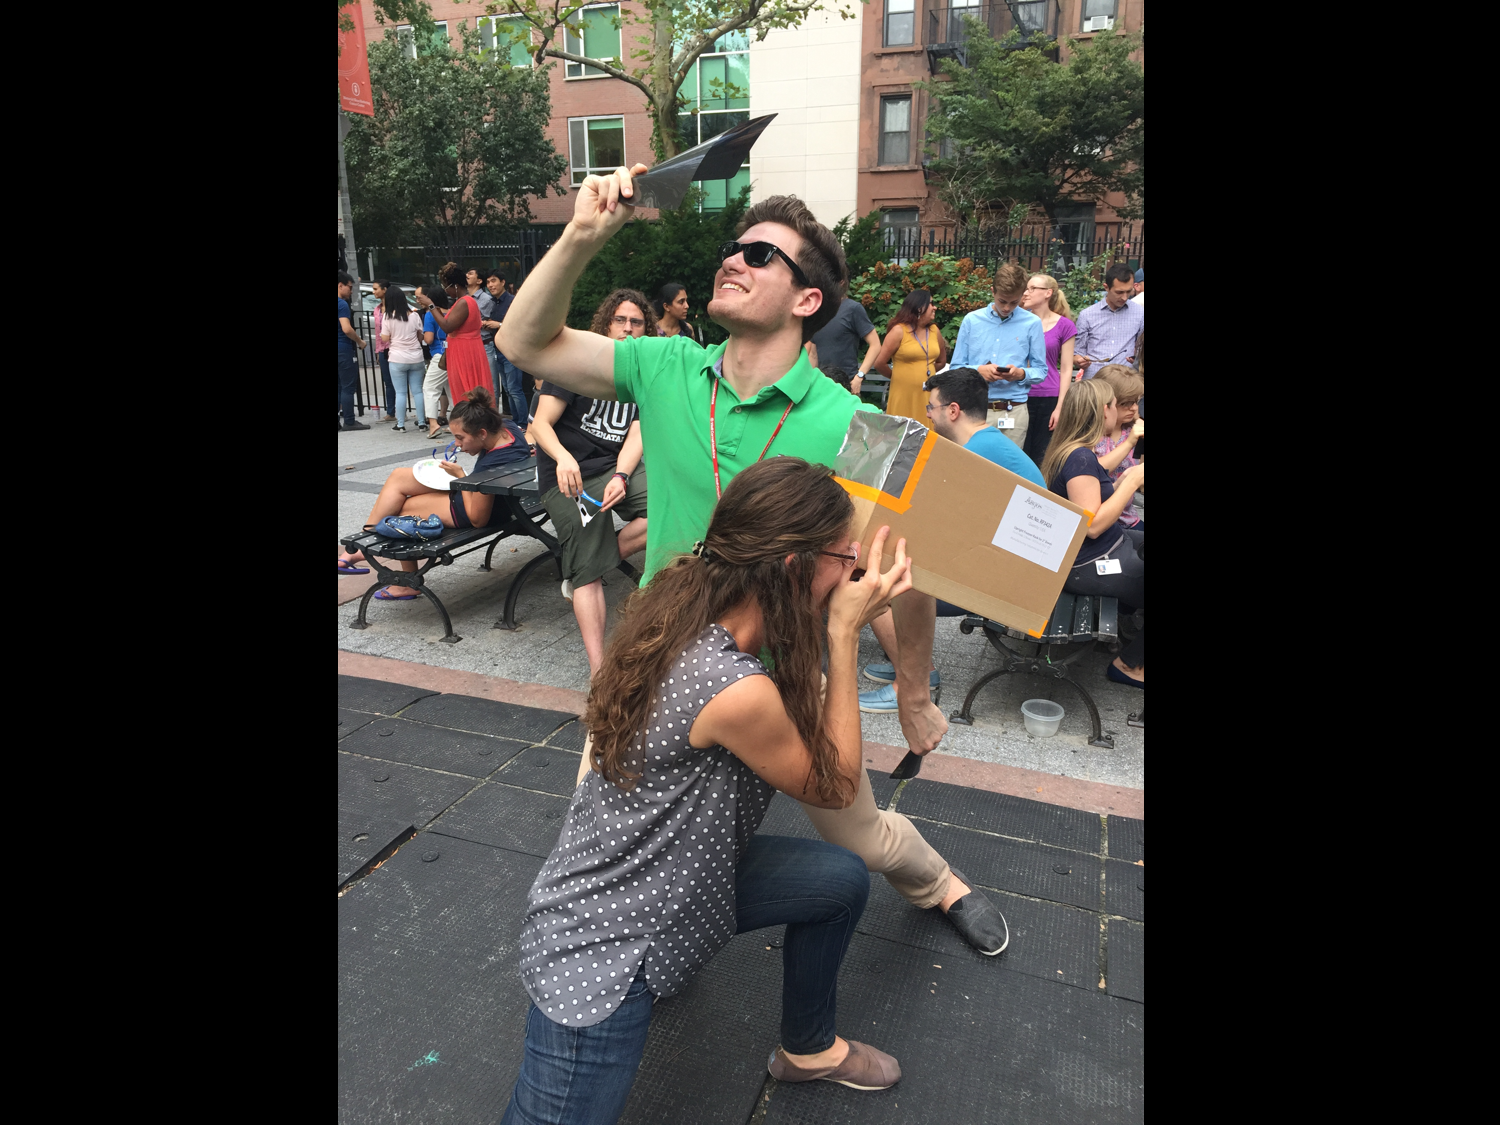  Varying complexities of lab-built solar eclipse viewing contraptions  (left to right) Adam Rosenzweig, Bethany Schaffer  August 2017 